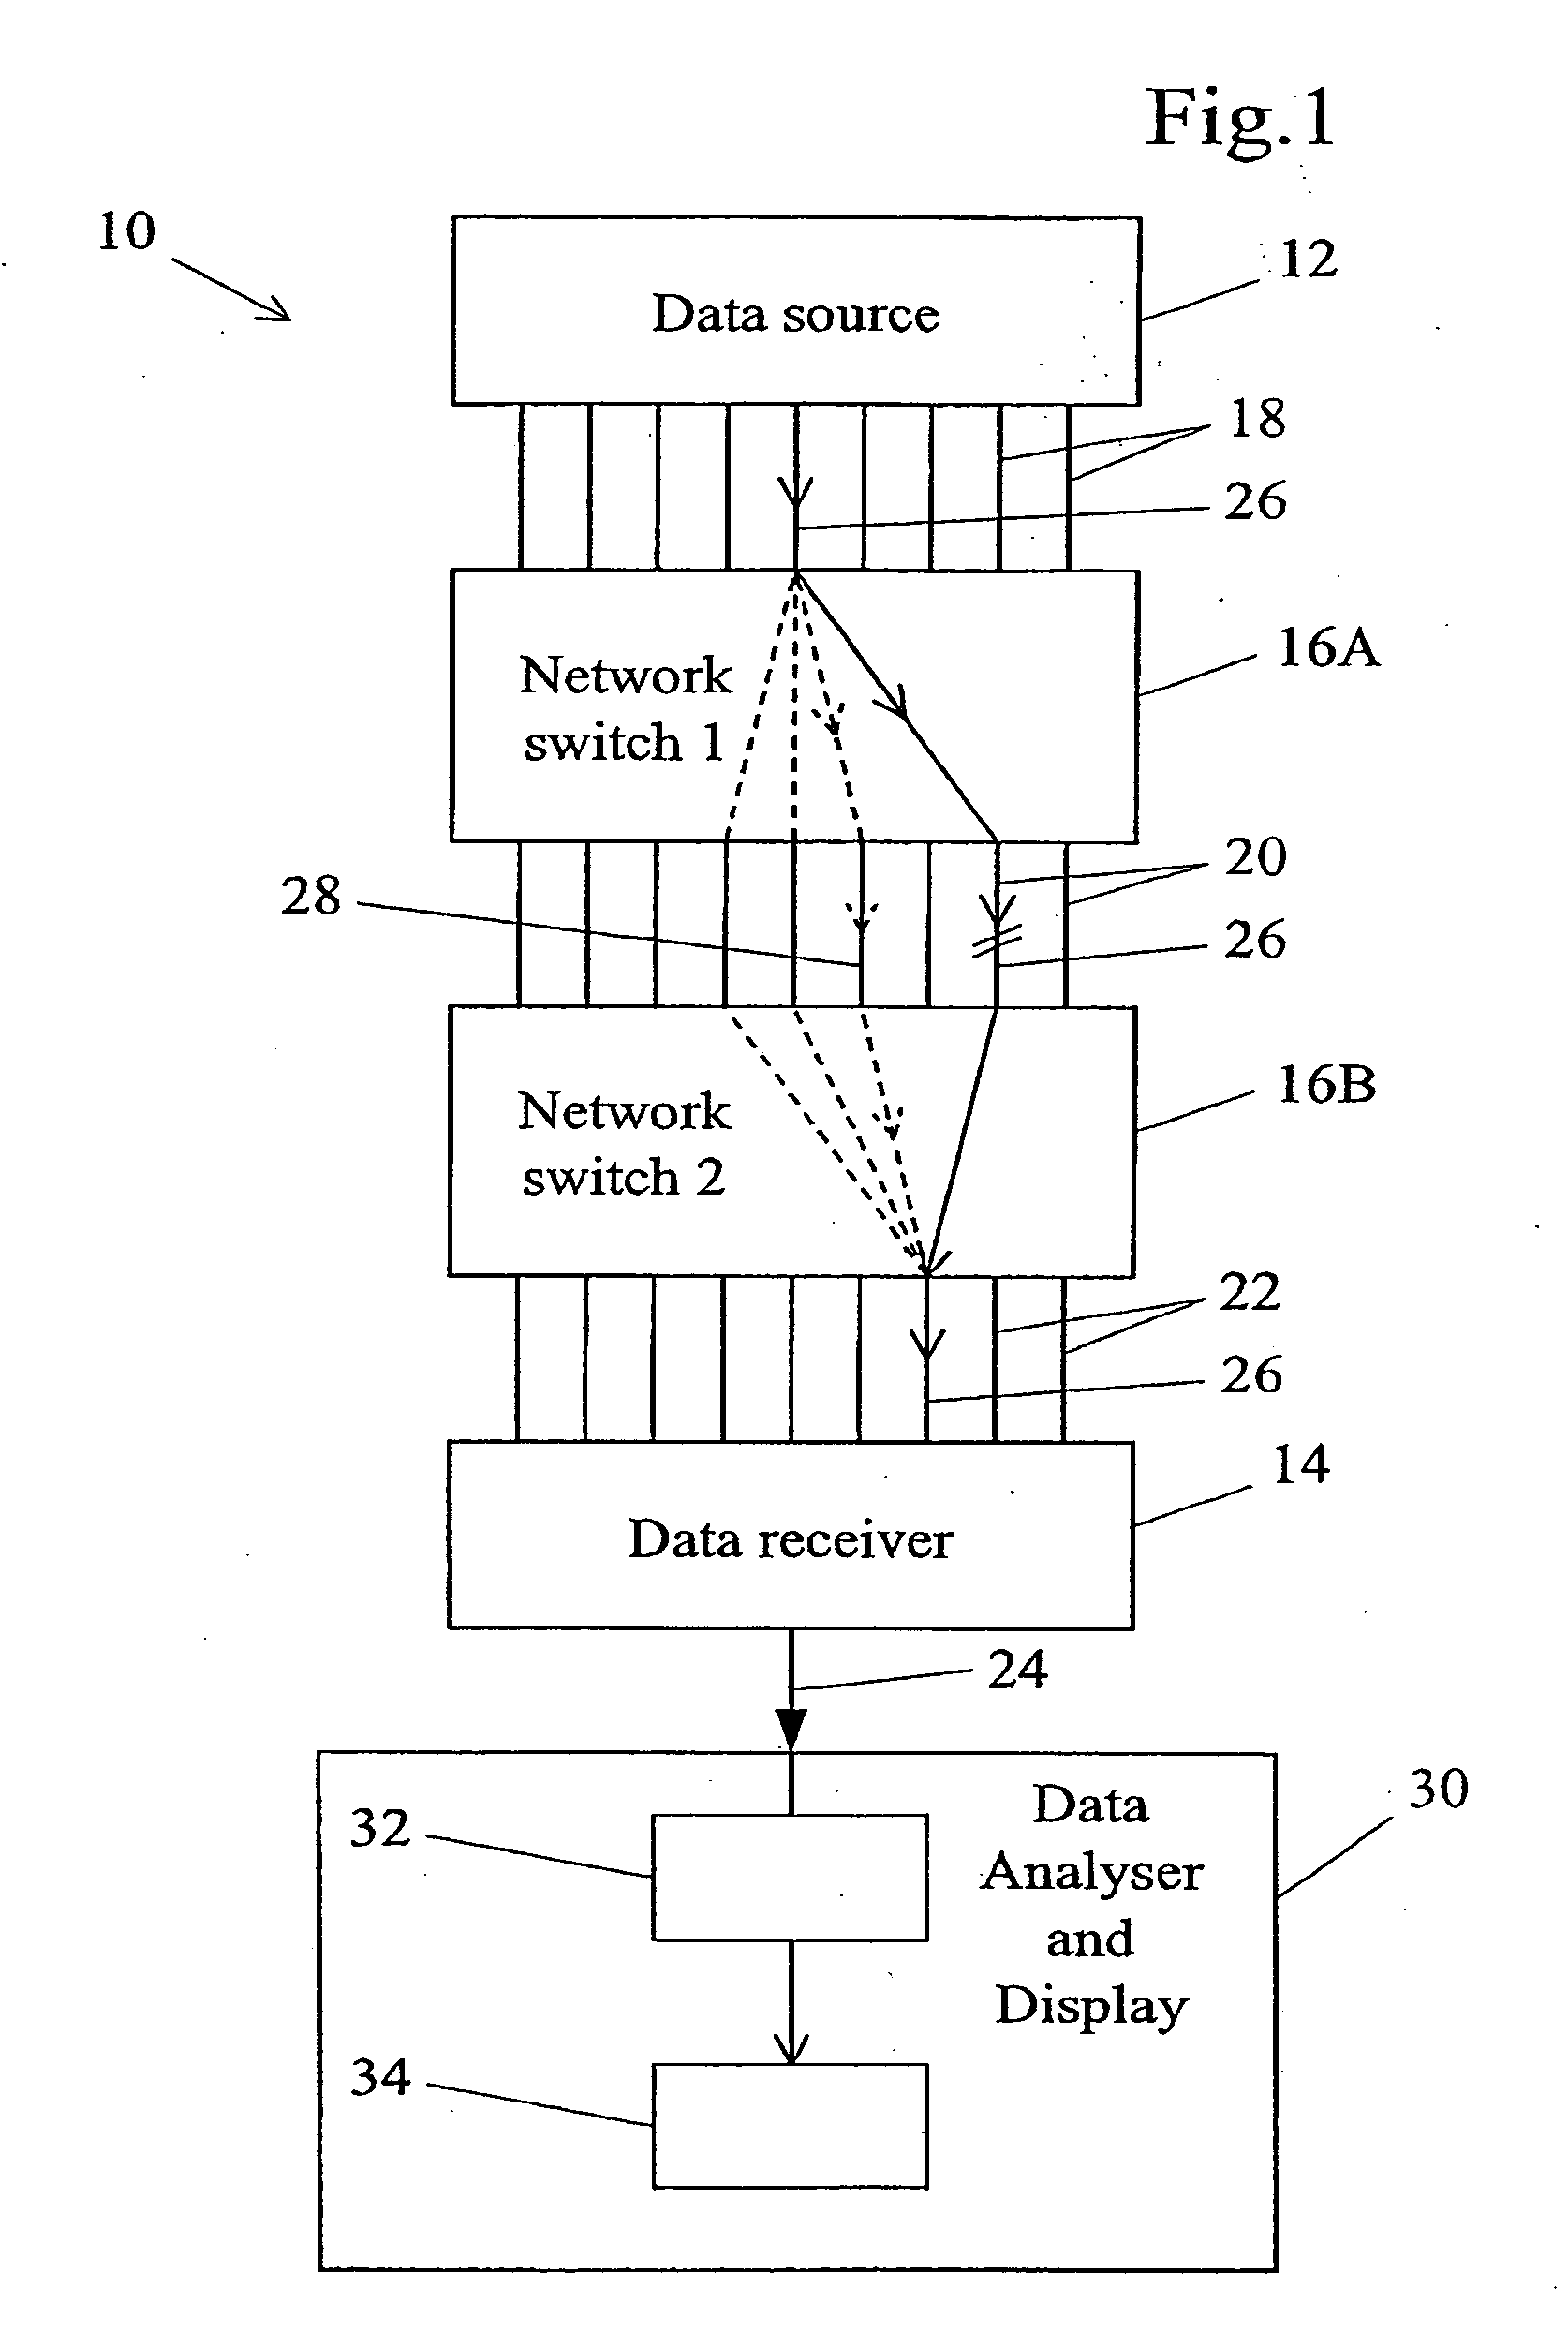 Methods and apparatus for testing automatic path protection switching